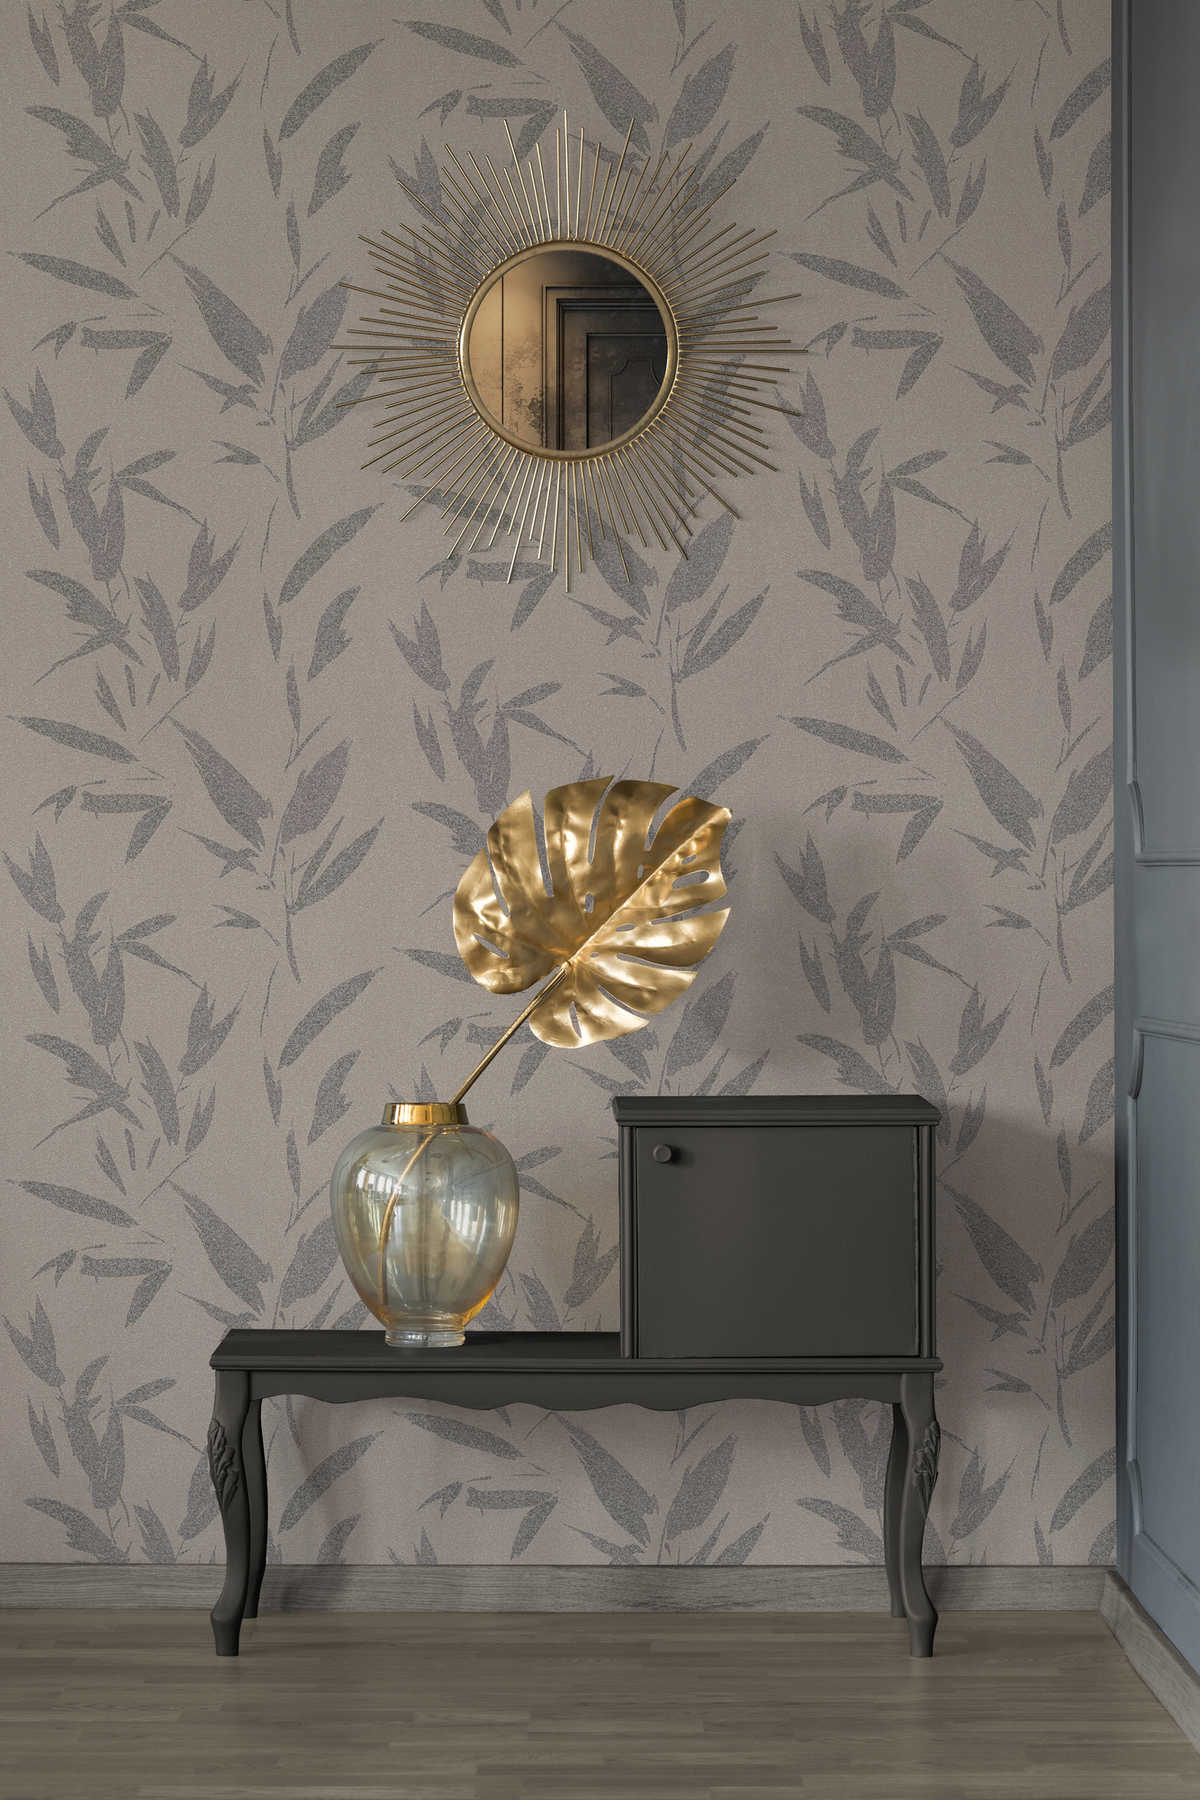             Non-woven wallpaper leaf motif abstract, textile look - brown, beige
        